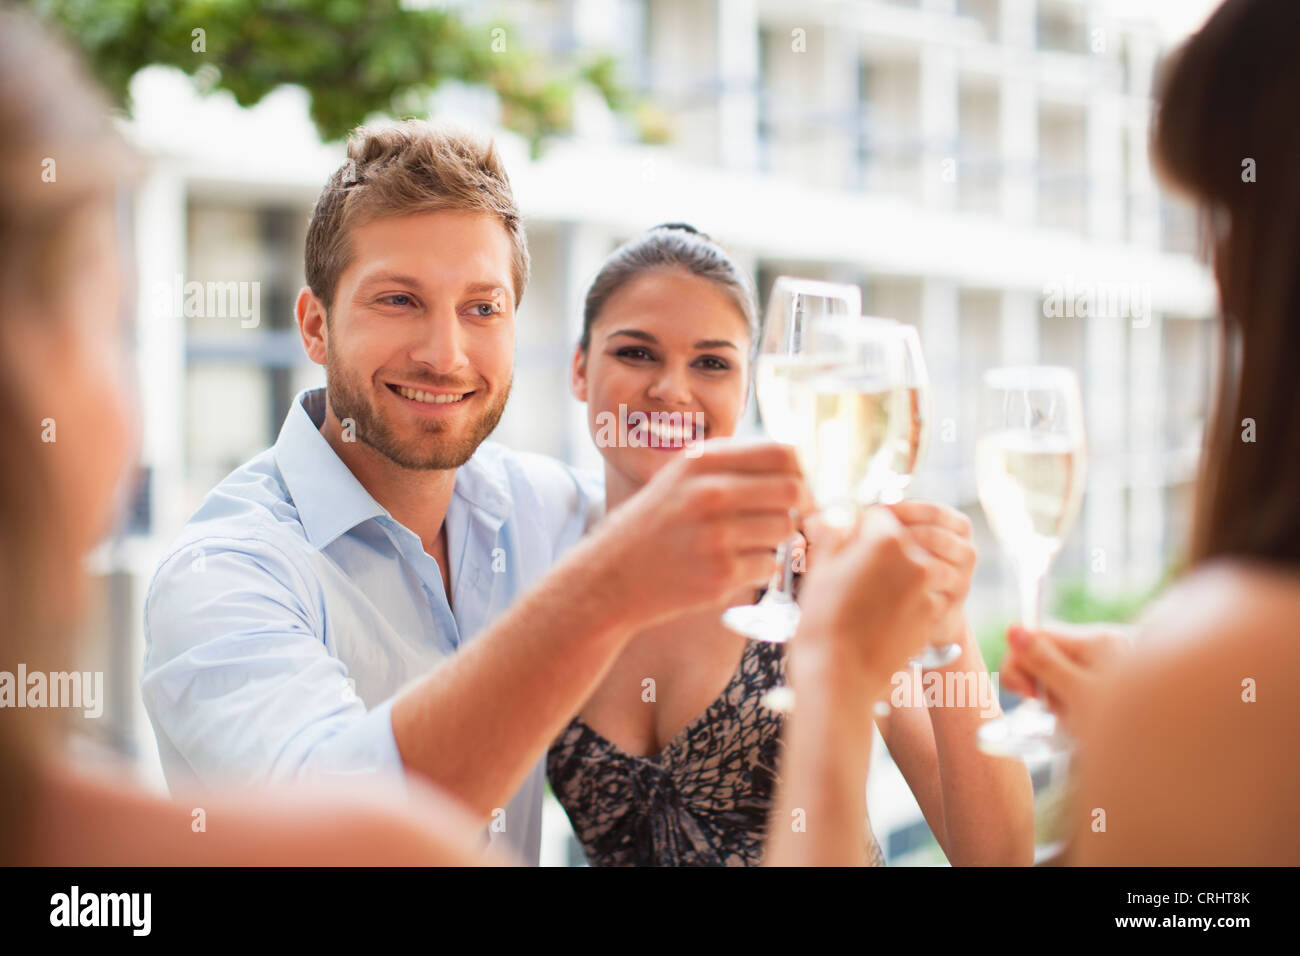 Friends toasting each other Stock Photo